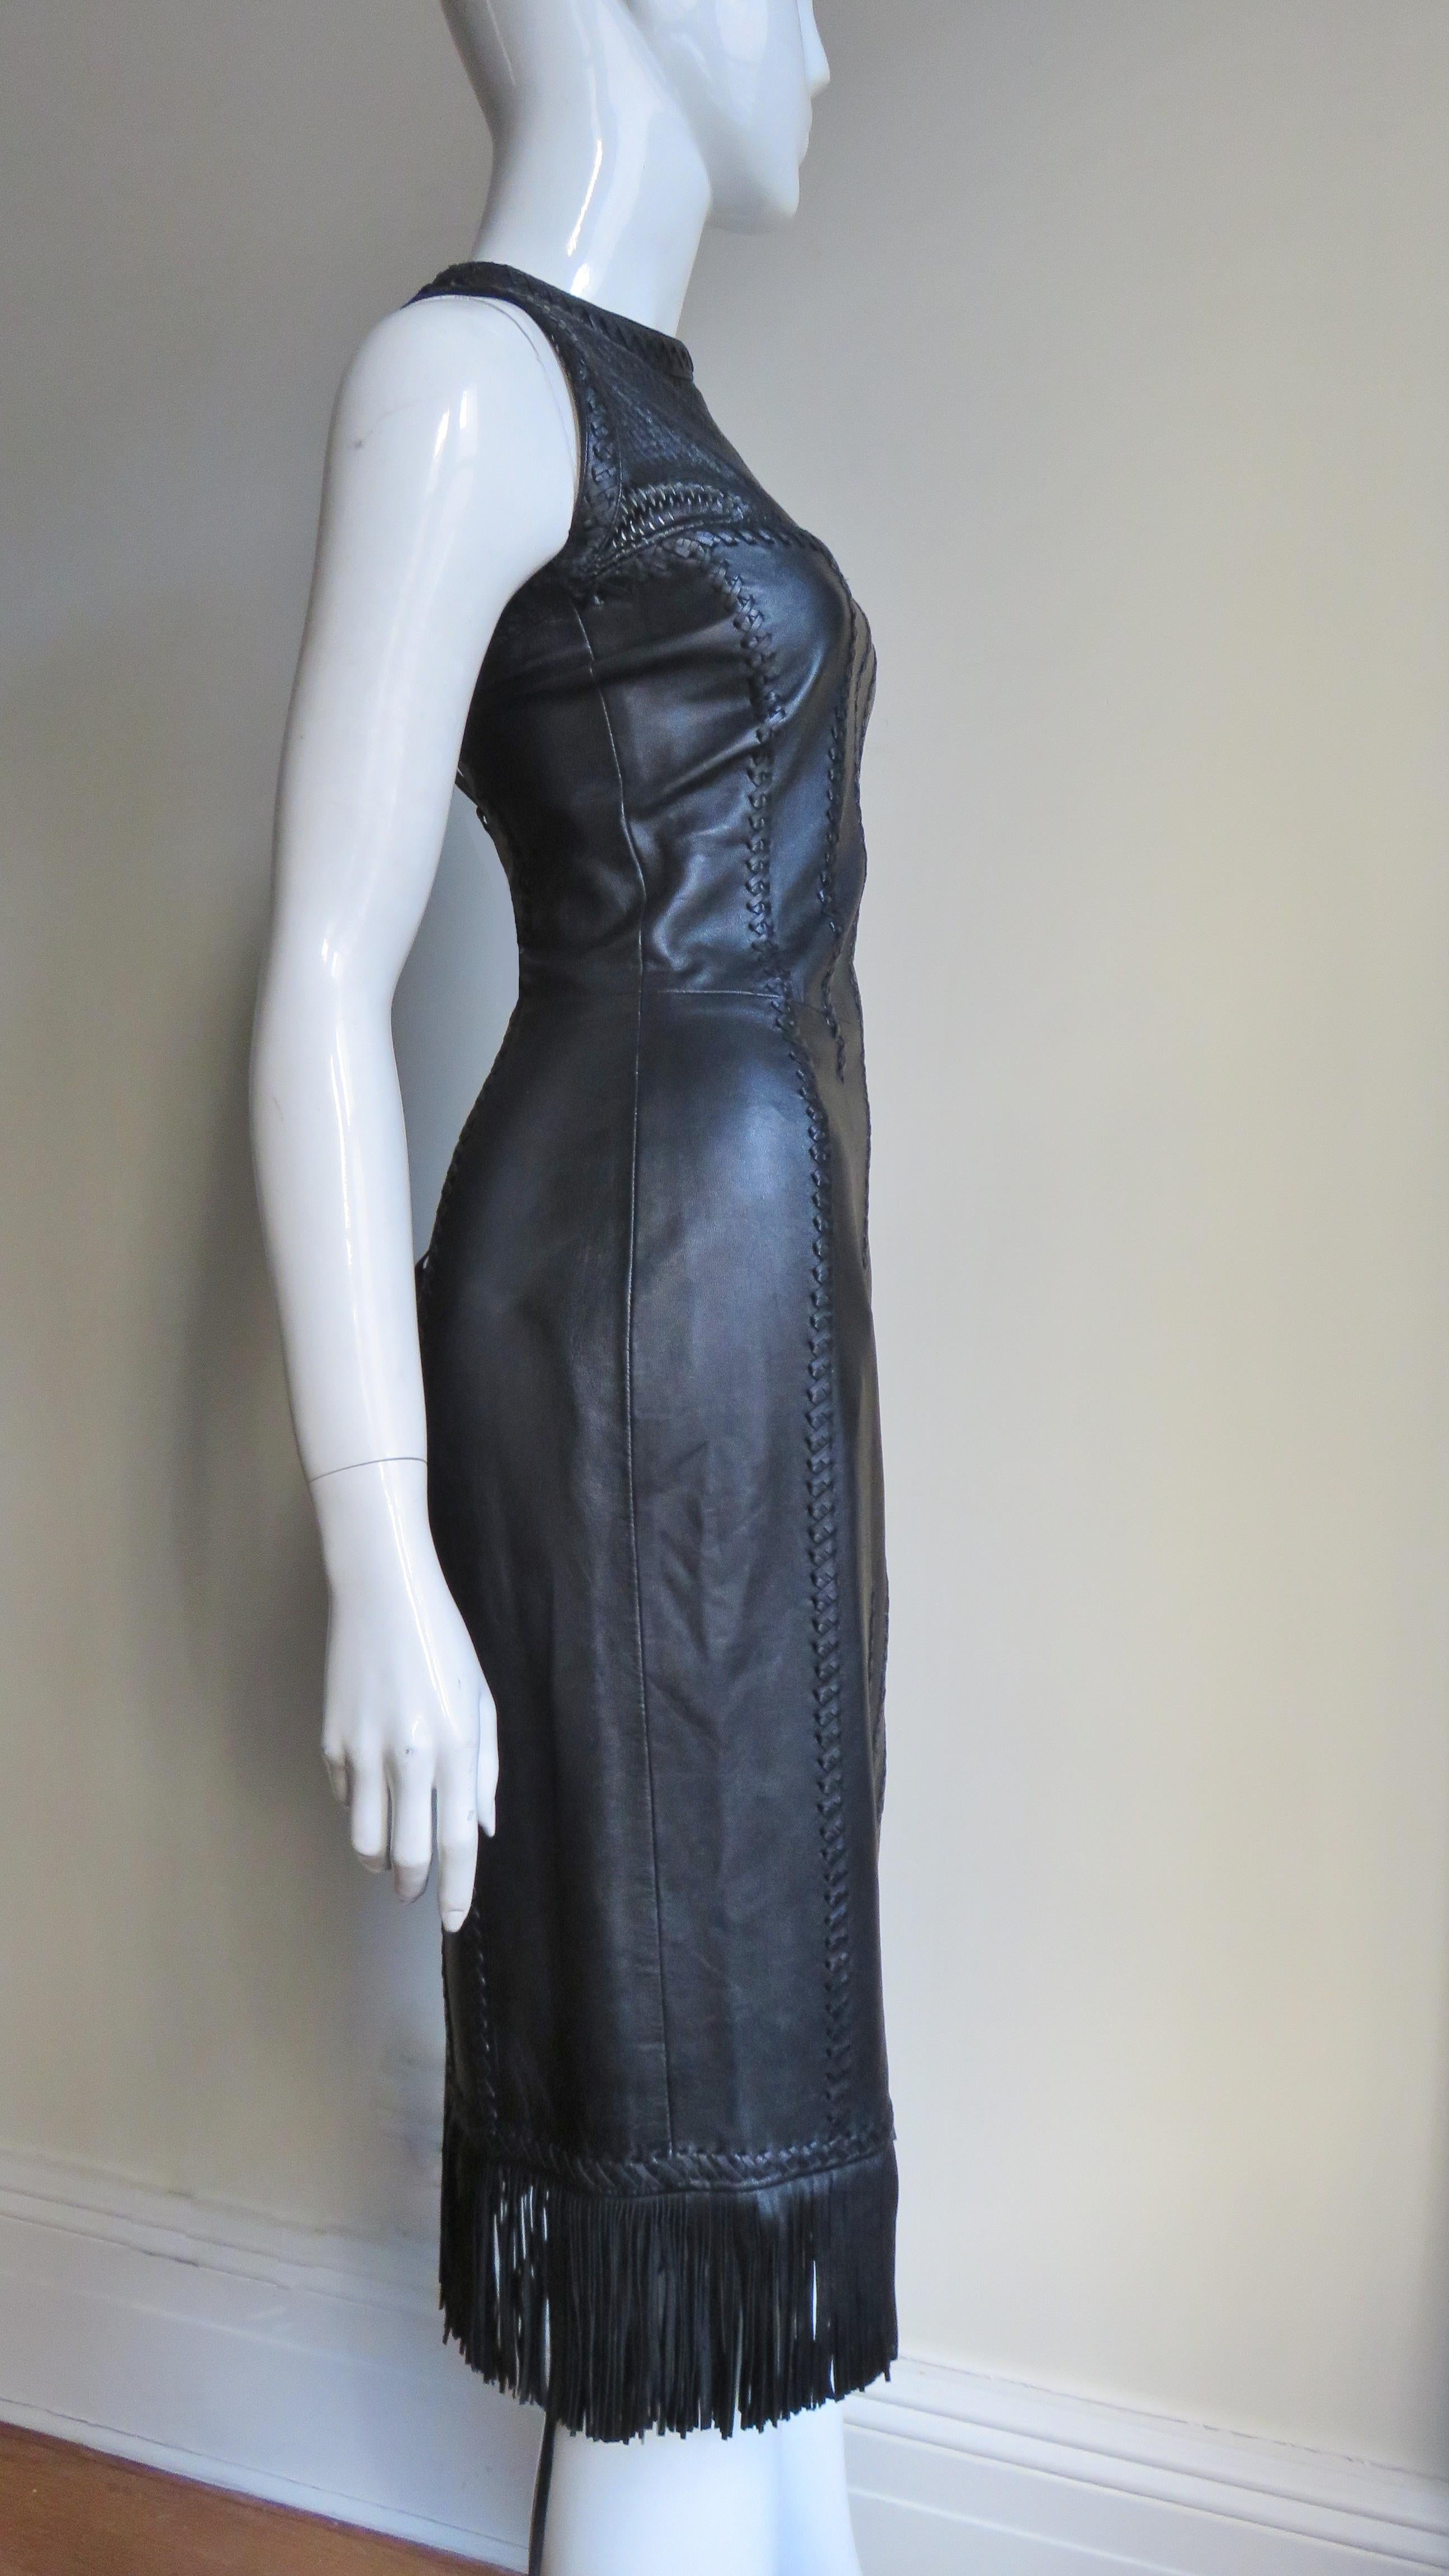  Gianni Versace Leather Lace up Dress S/S 2002 For Sale 5